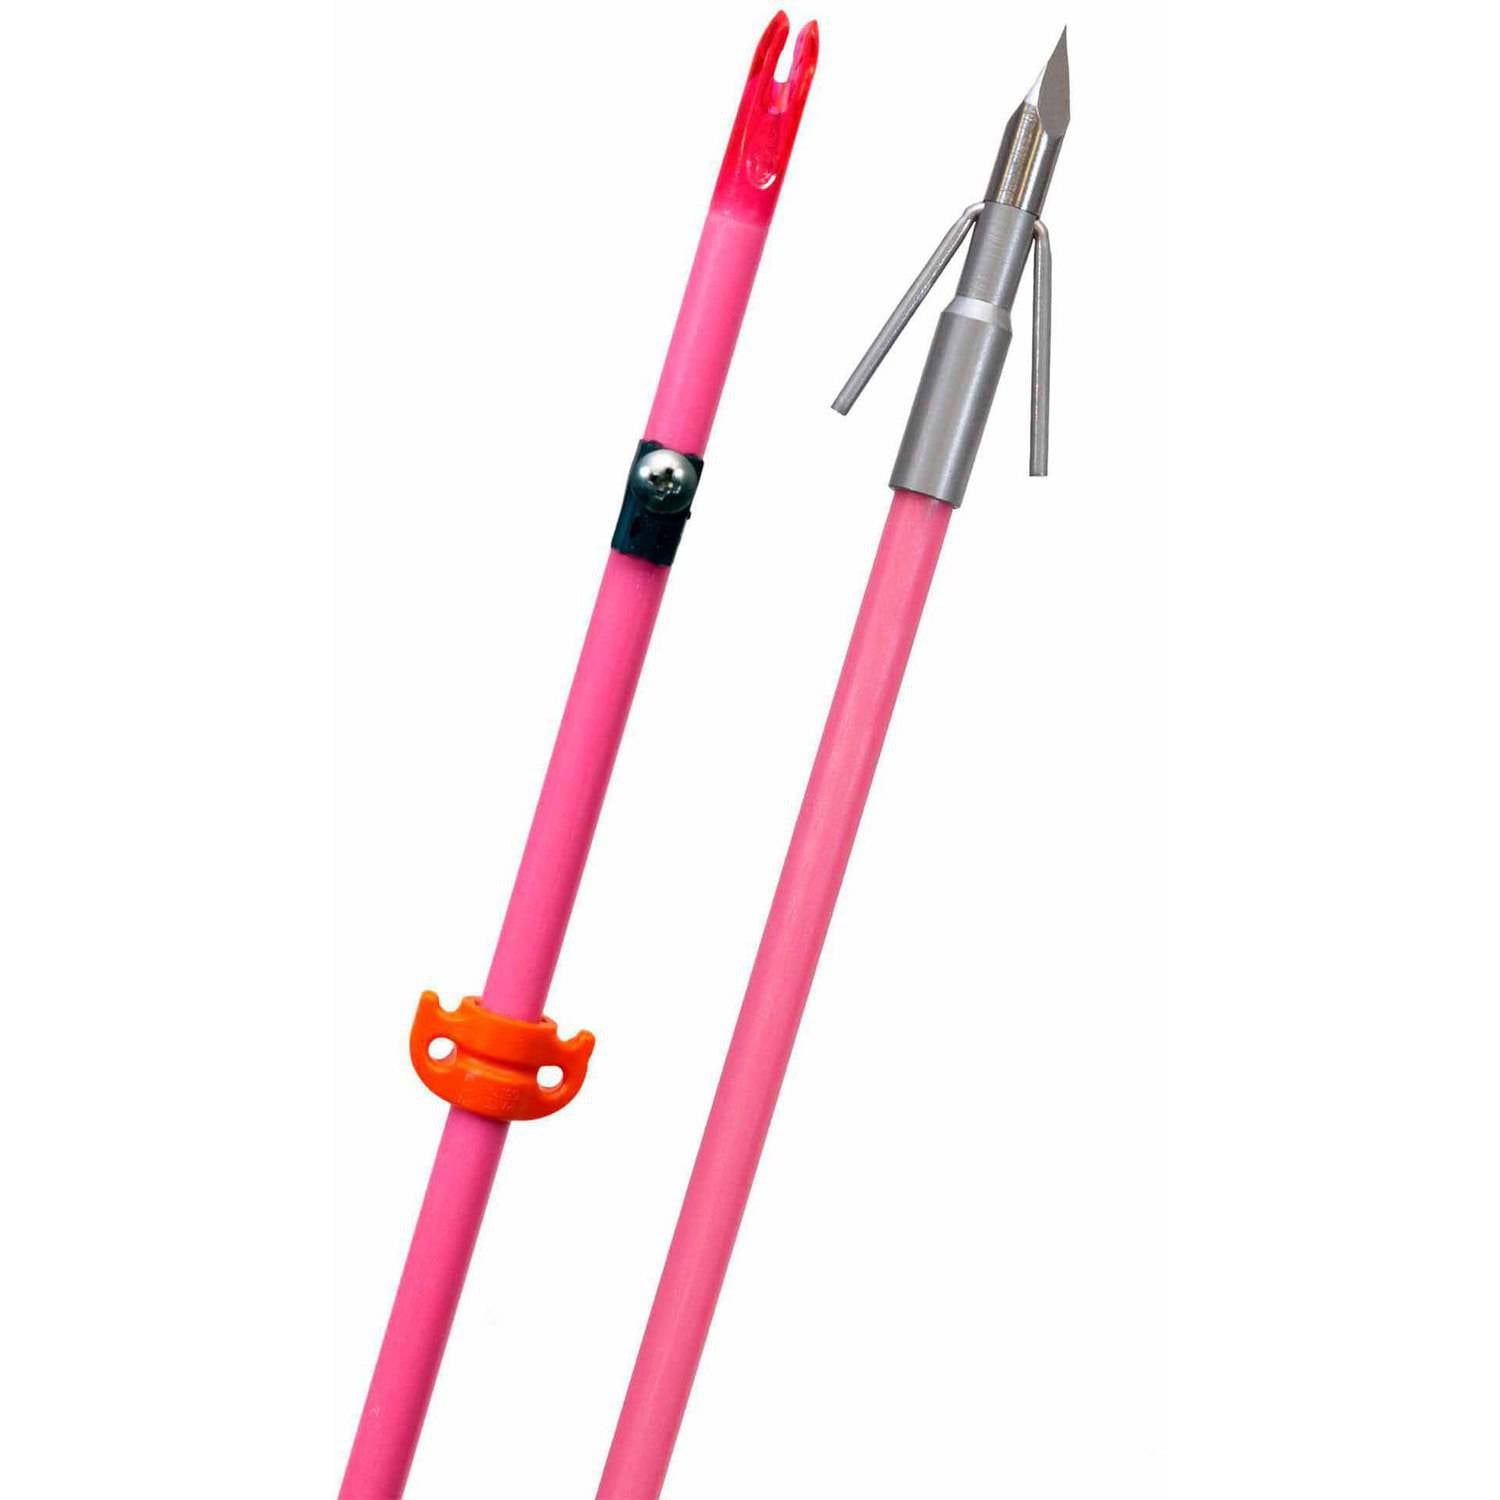 Raiderette Pro Bowfishing Arrow with Riptide Point by Fin-Finder, Pink